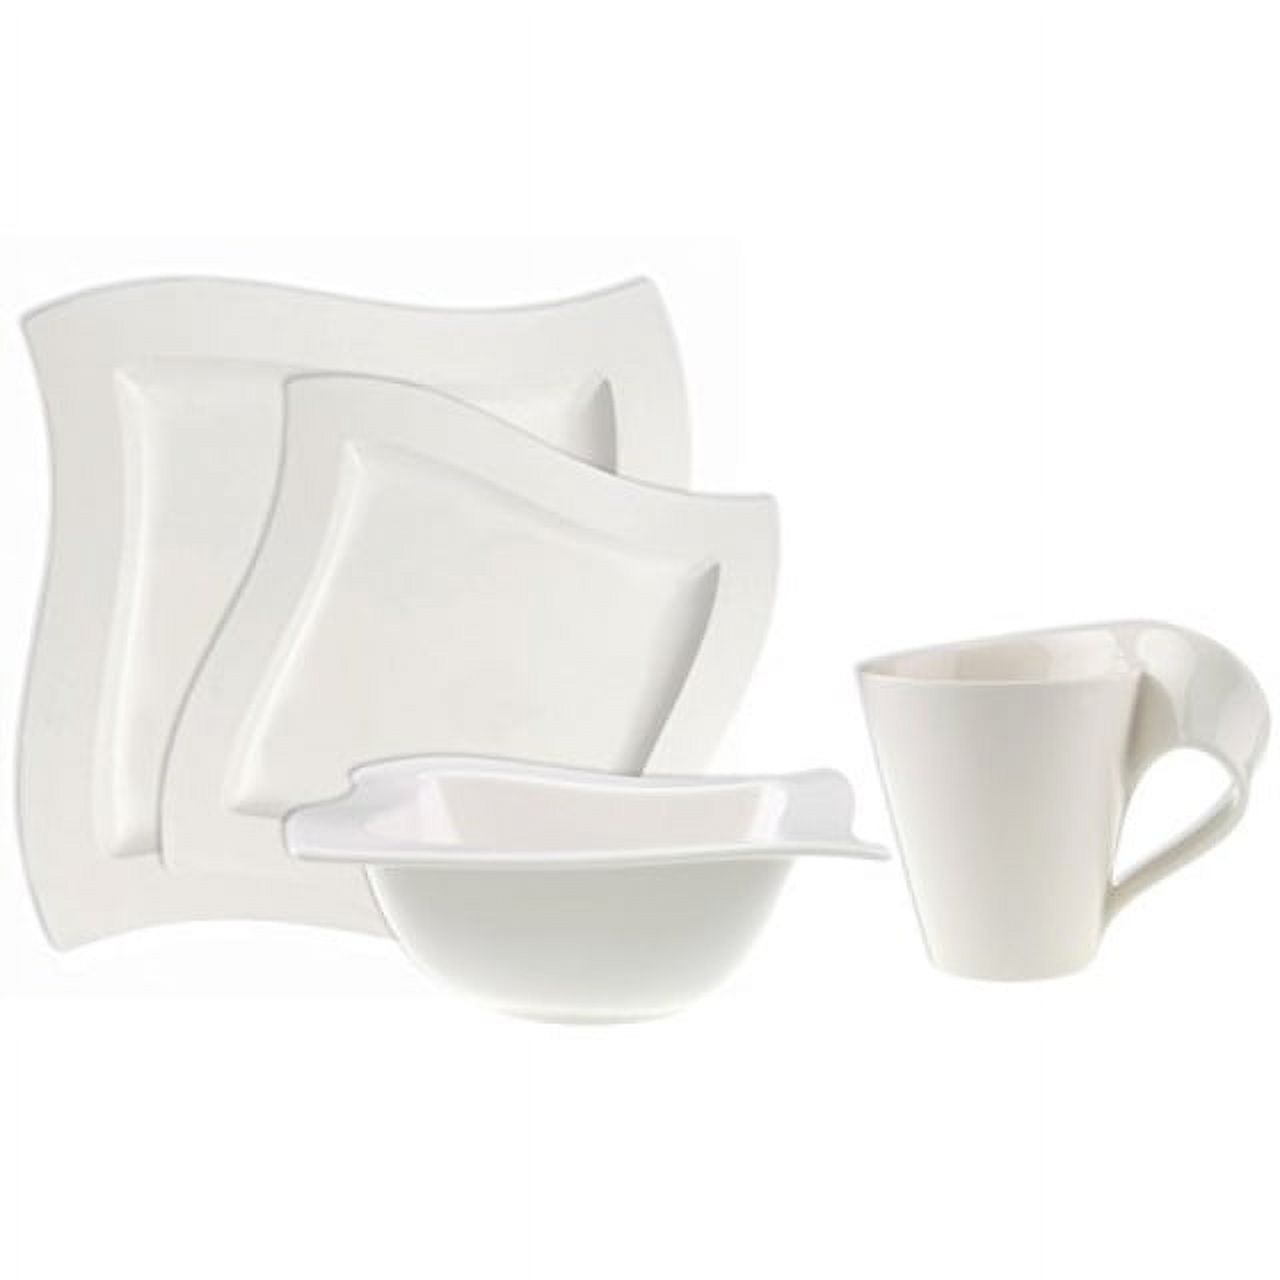 villeroy & boch 4003683463816 new wave 4-piece place setting dinner, salad plate, bowl, and mug - premium porcelain, set of 4 (variable), dinnerware - image 1 of 5